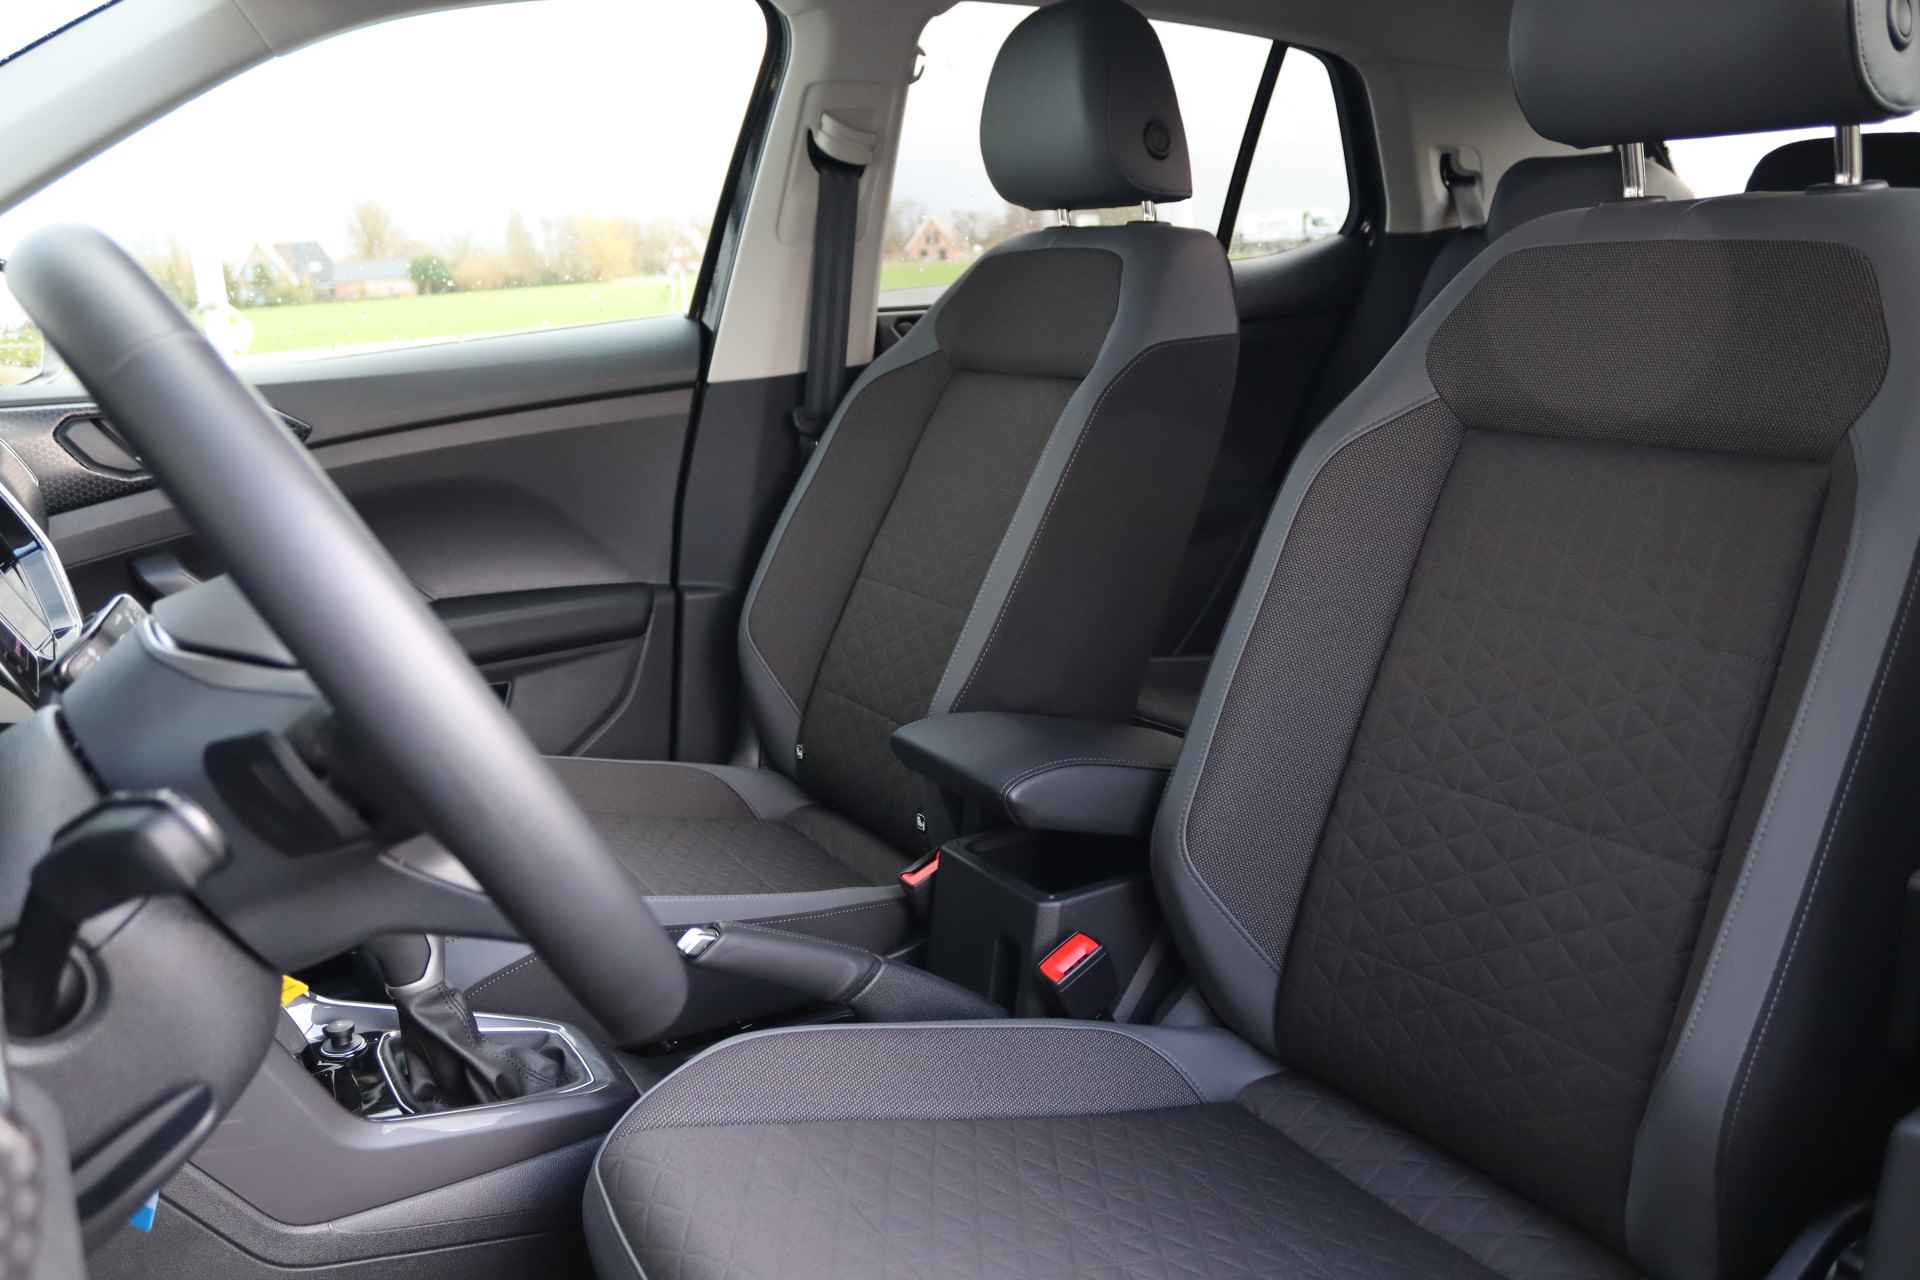 Volkswagen T-Cross 1.5 TSI 150 pk DSG Style | Camera | Stoelverwarming | Climatronic airco | PDC voor & achter | App connect | - 15/43